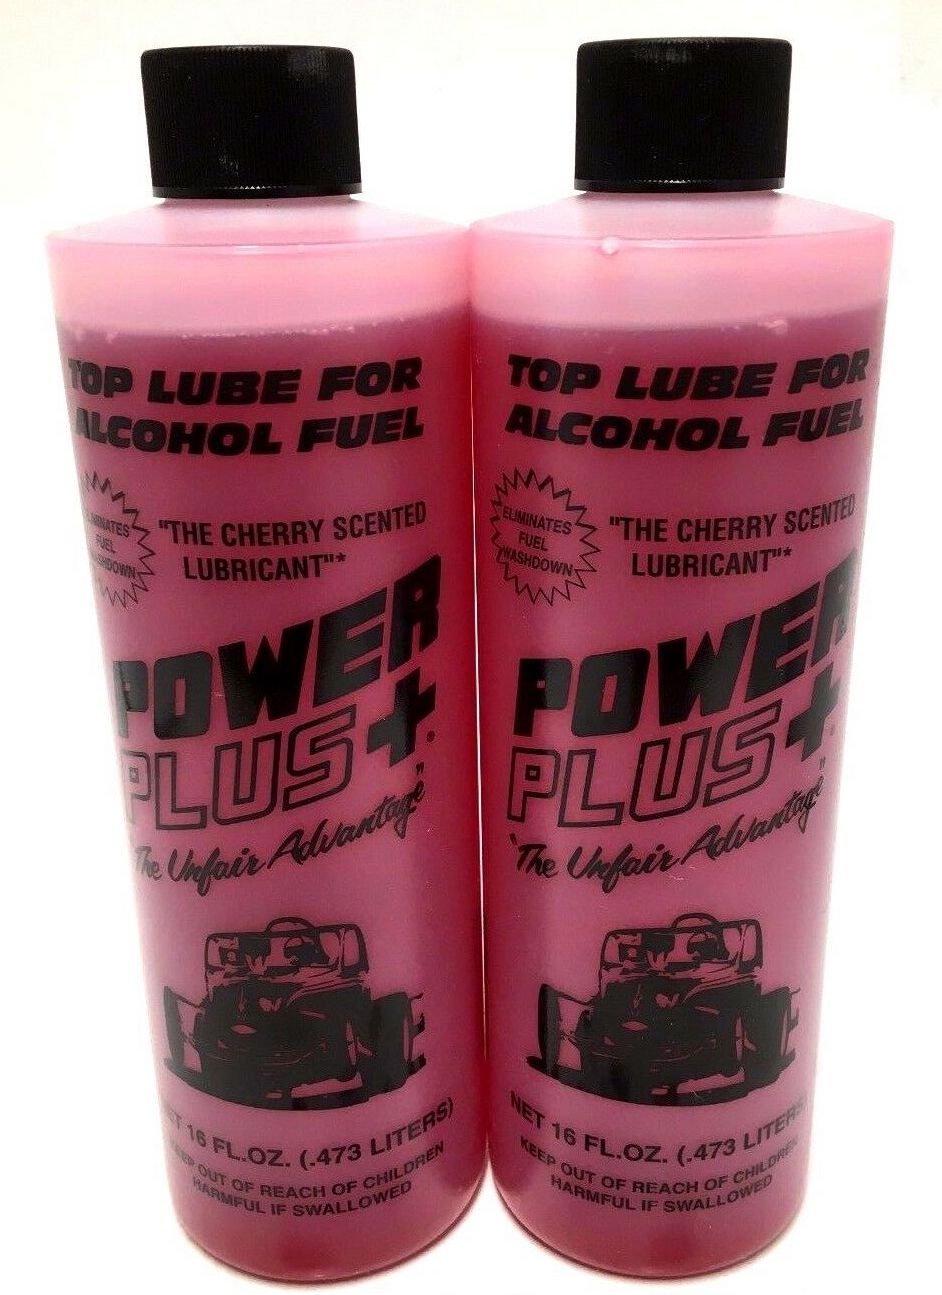 PowerPlus Cherry Scented Lubricants Alcohol Top Lube 16oz-Liquid Power Upper Cylinder Lube - 2 PACK